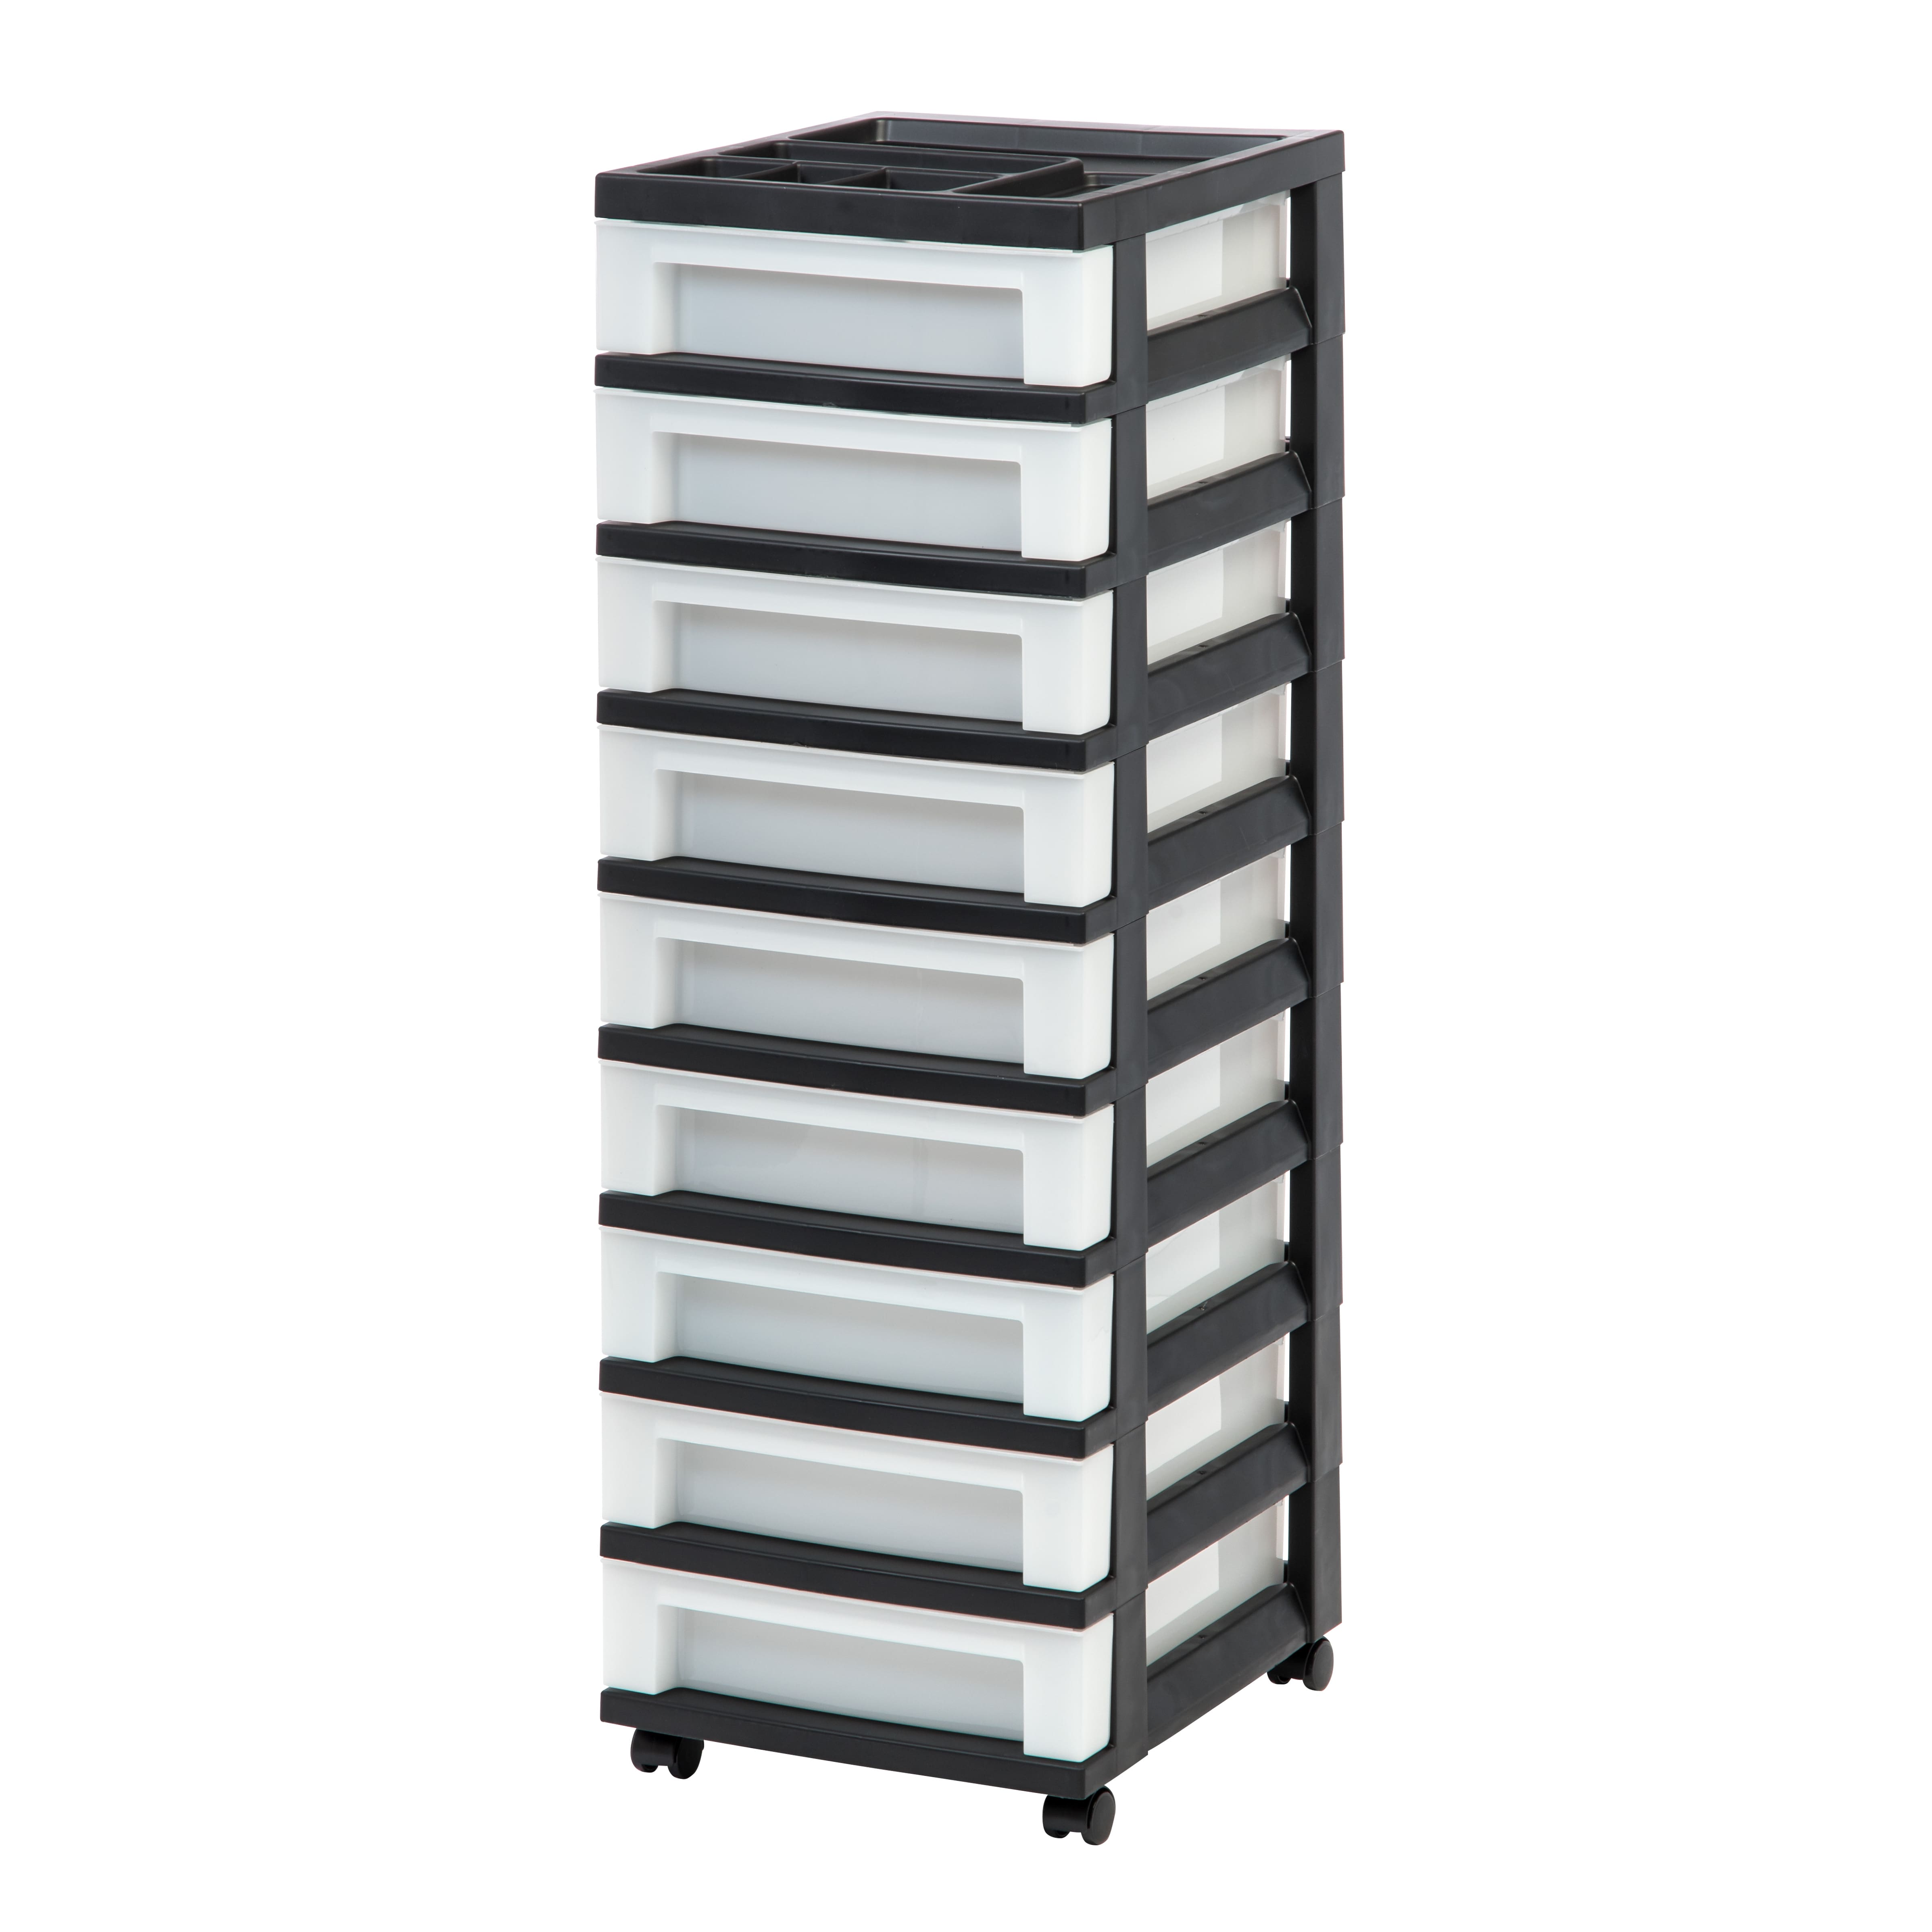 40% off ALL Regular Priced Purchases at Michael's, 12 Drawer Rolling Cart  by Simply Tidy only $47.99 (reg. $79.99)